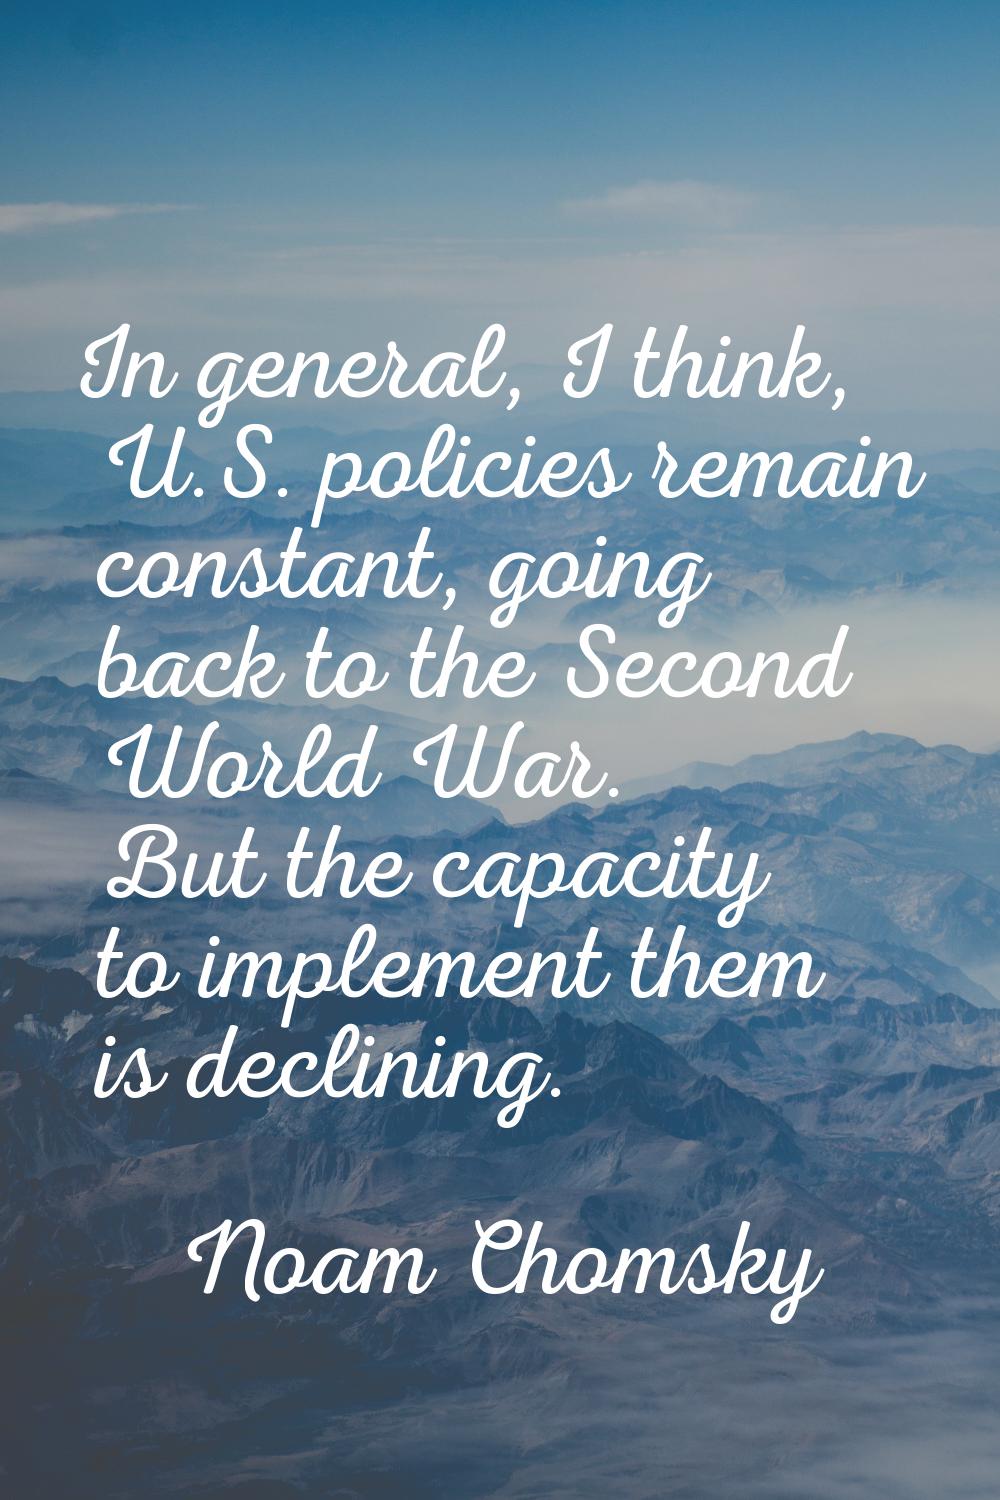 In general, I think, U.S. policies remain constant, going back to the Second World War. But the cap